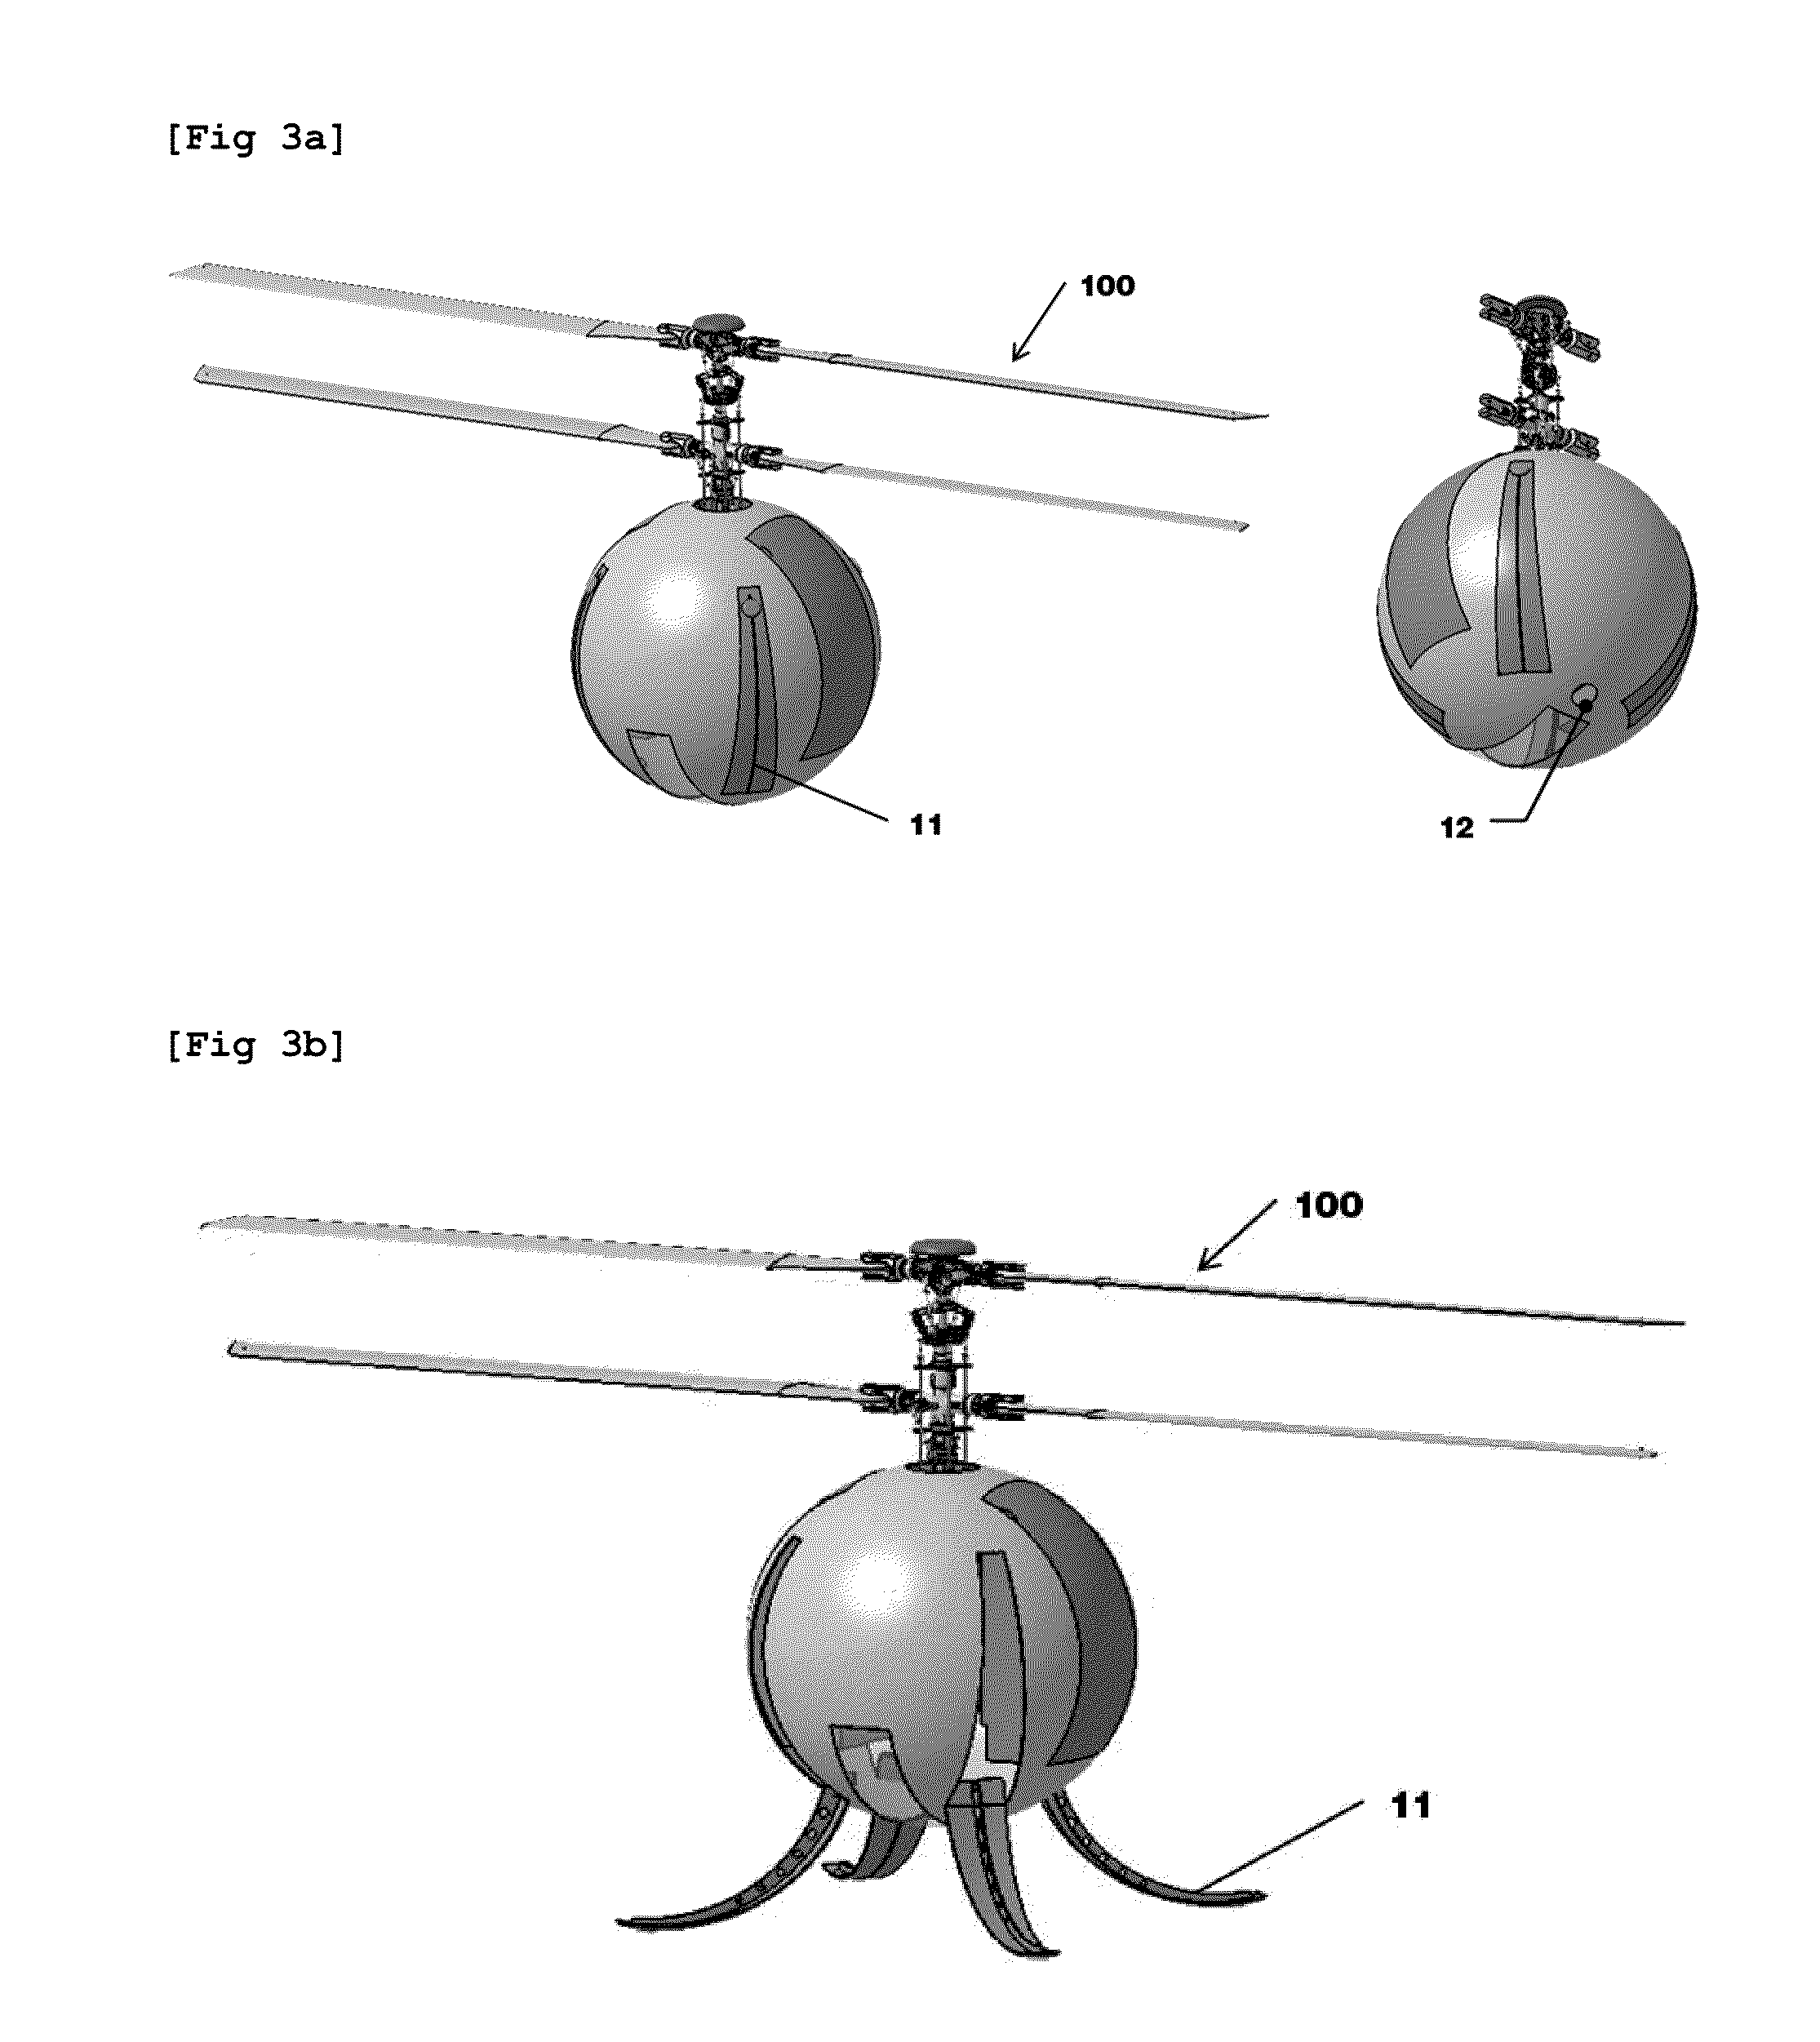 Unmanned Aerial Vehicle Having Spherical Loading Portion and Unmanned Ground Vehicle Therefor